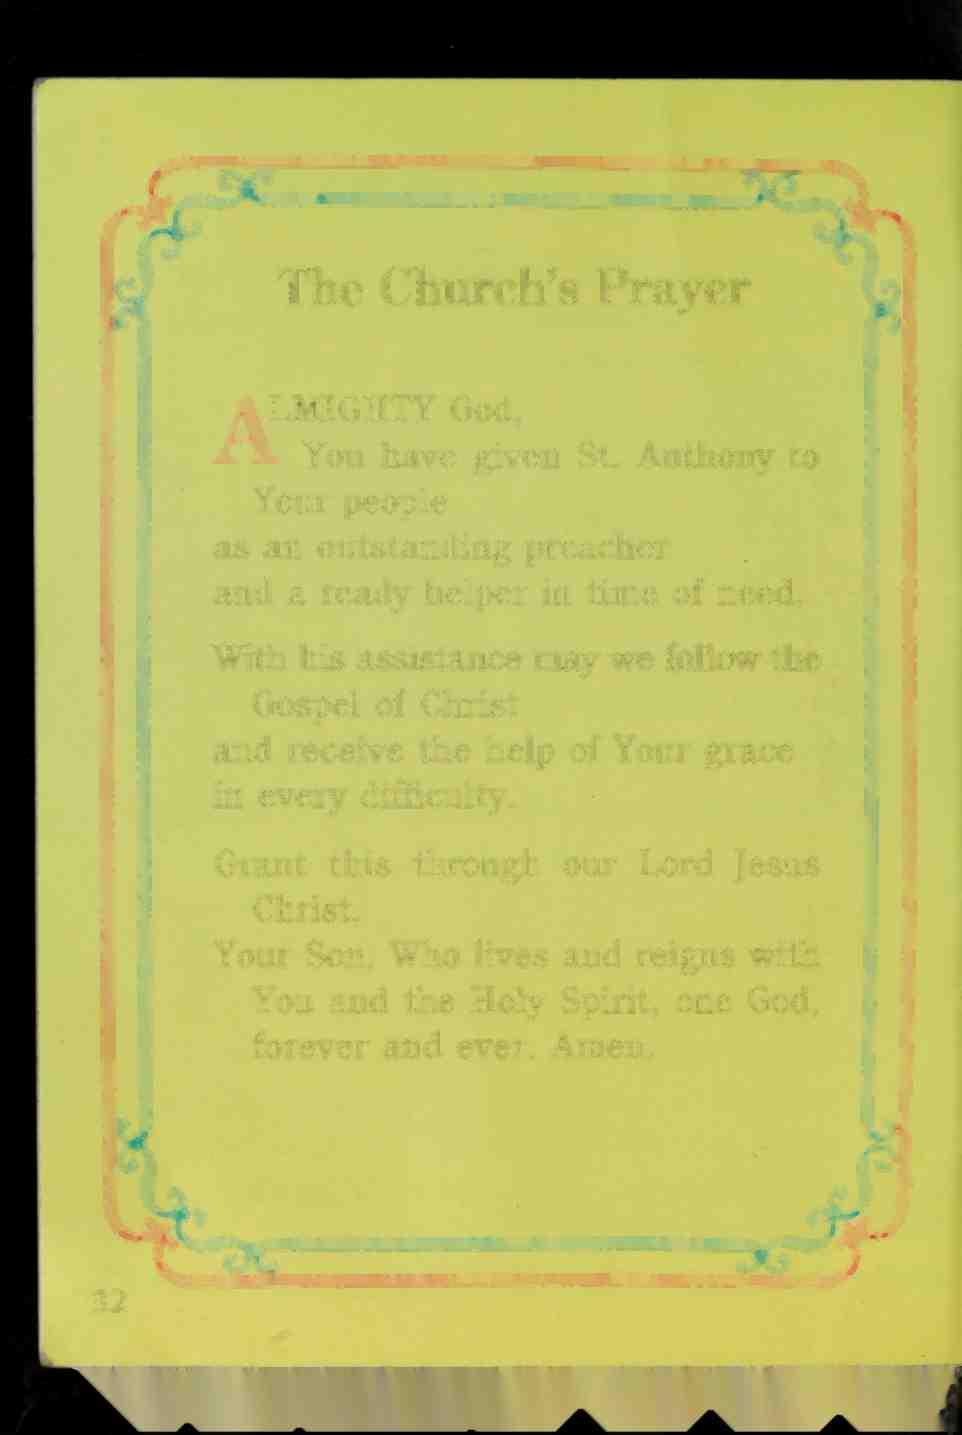 The Church's Prayer ALMIGHTY God, l You have given St.